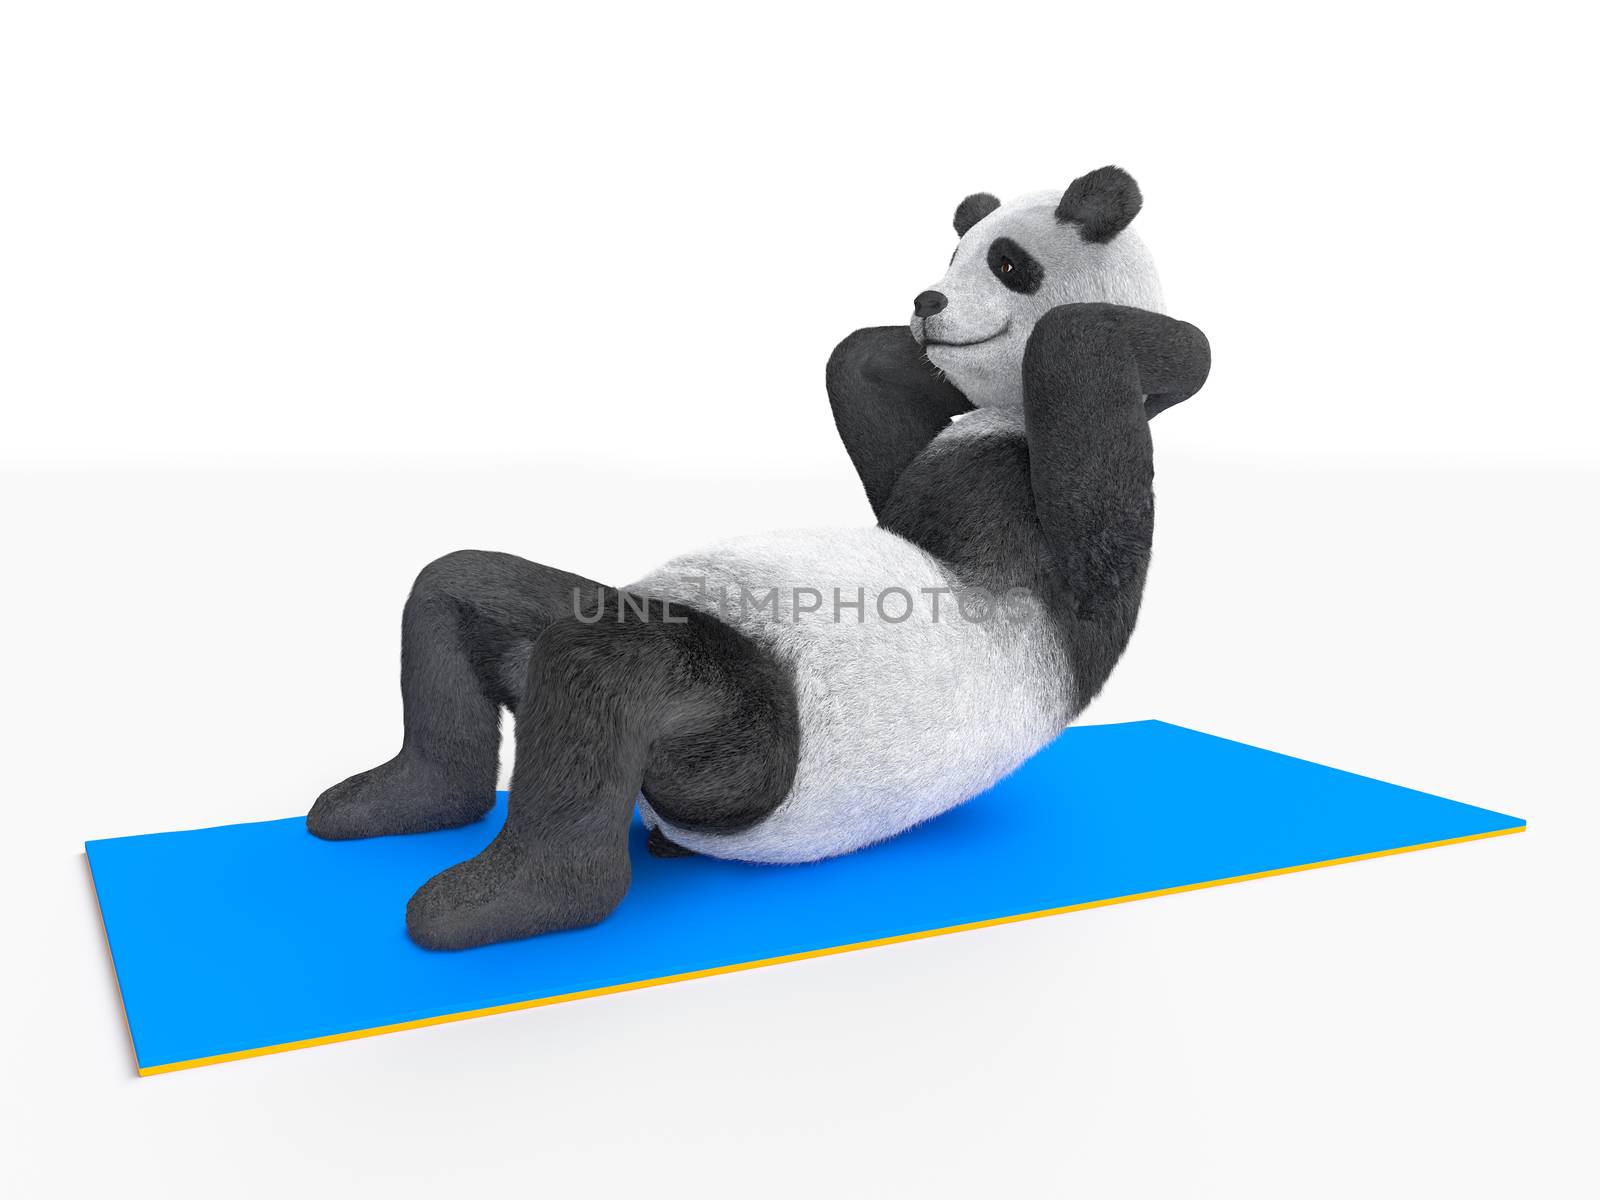 working abs trunk curls, illustration of sports and strengthening muscle tone. improve muscles of stomach and abdominals, demonstrated by fluffy personage character animal panda